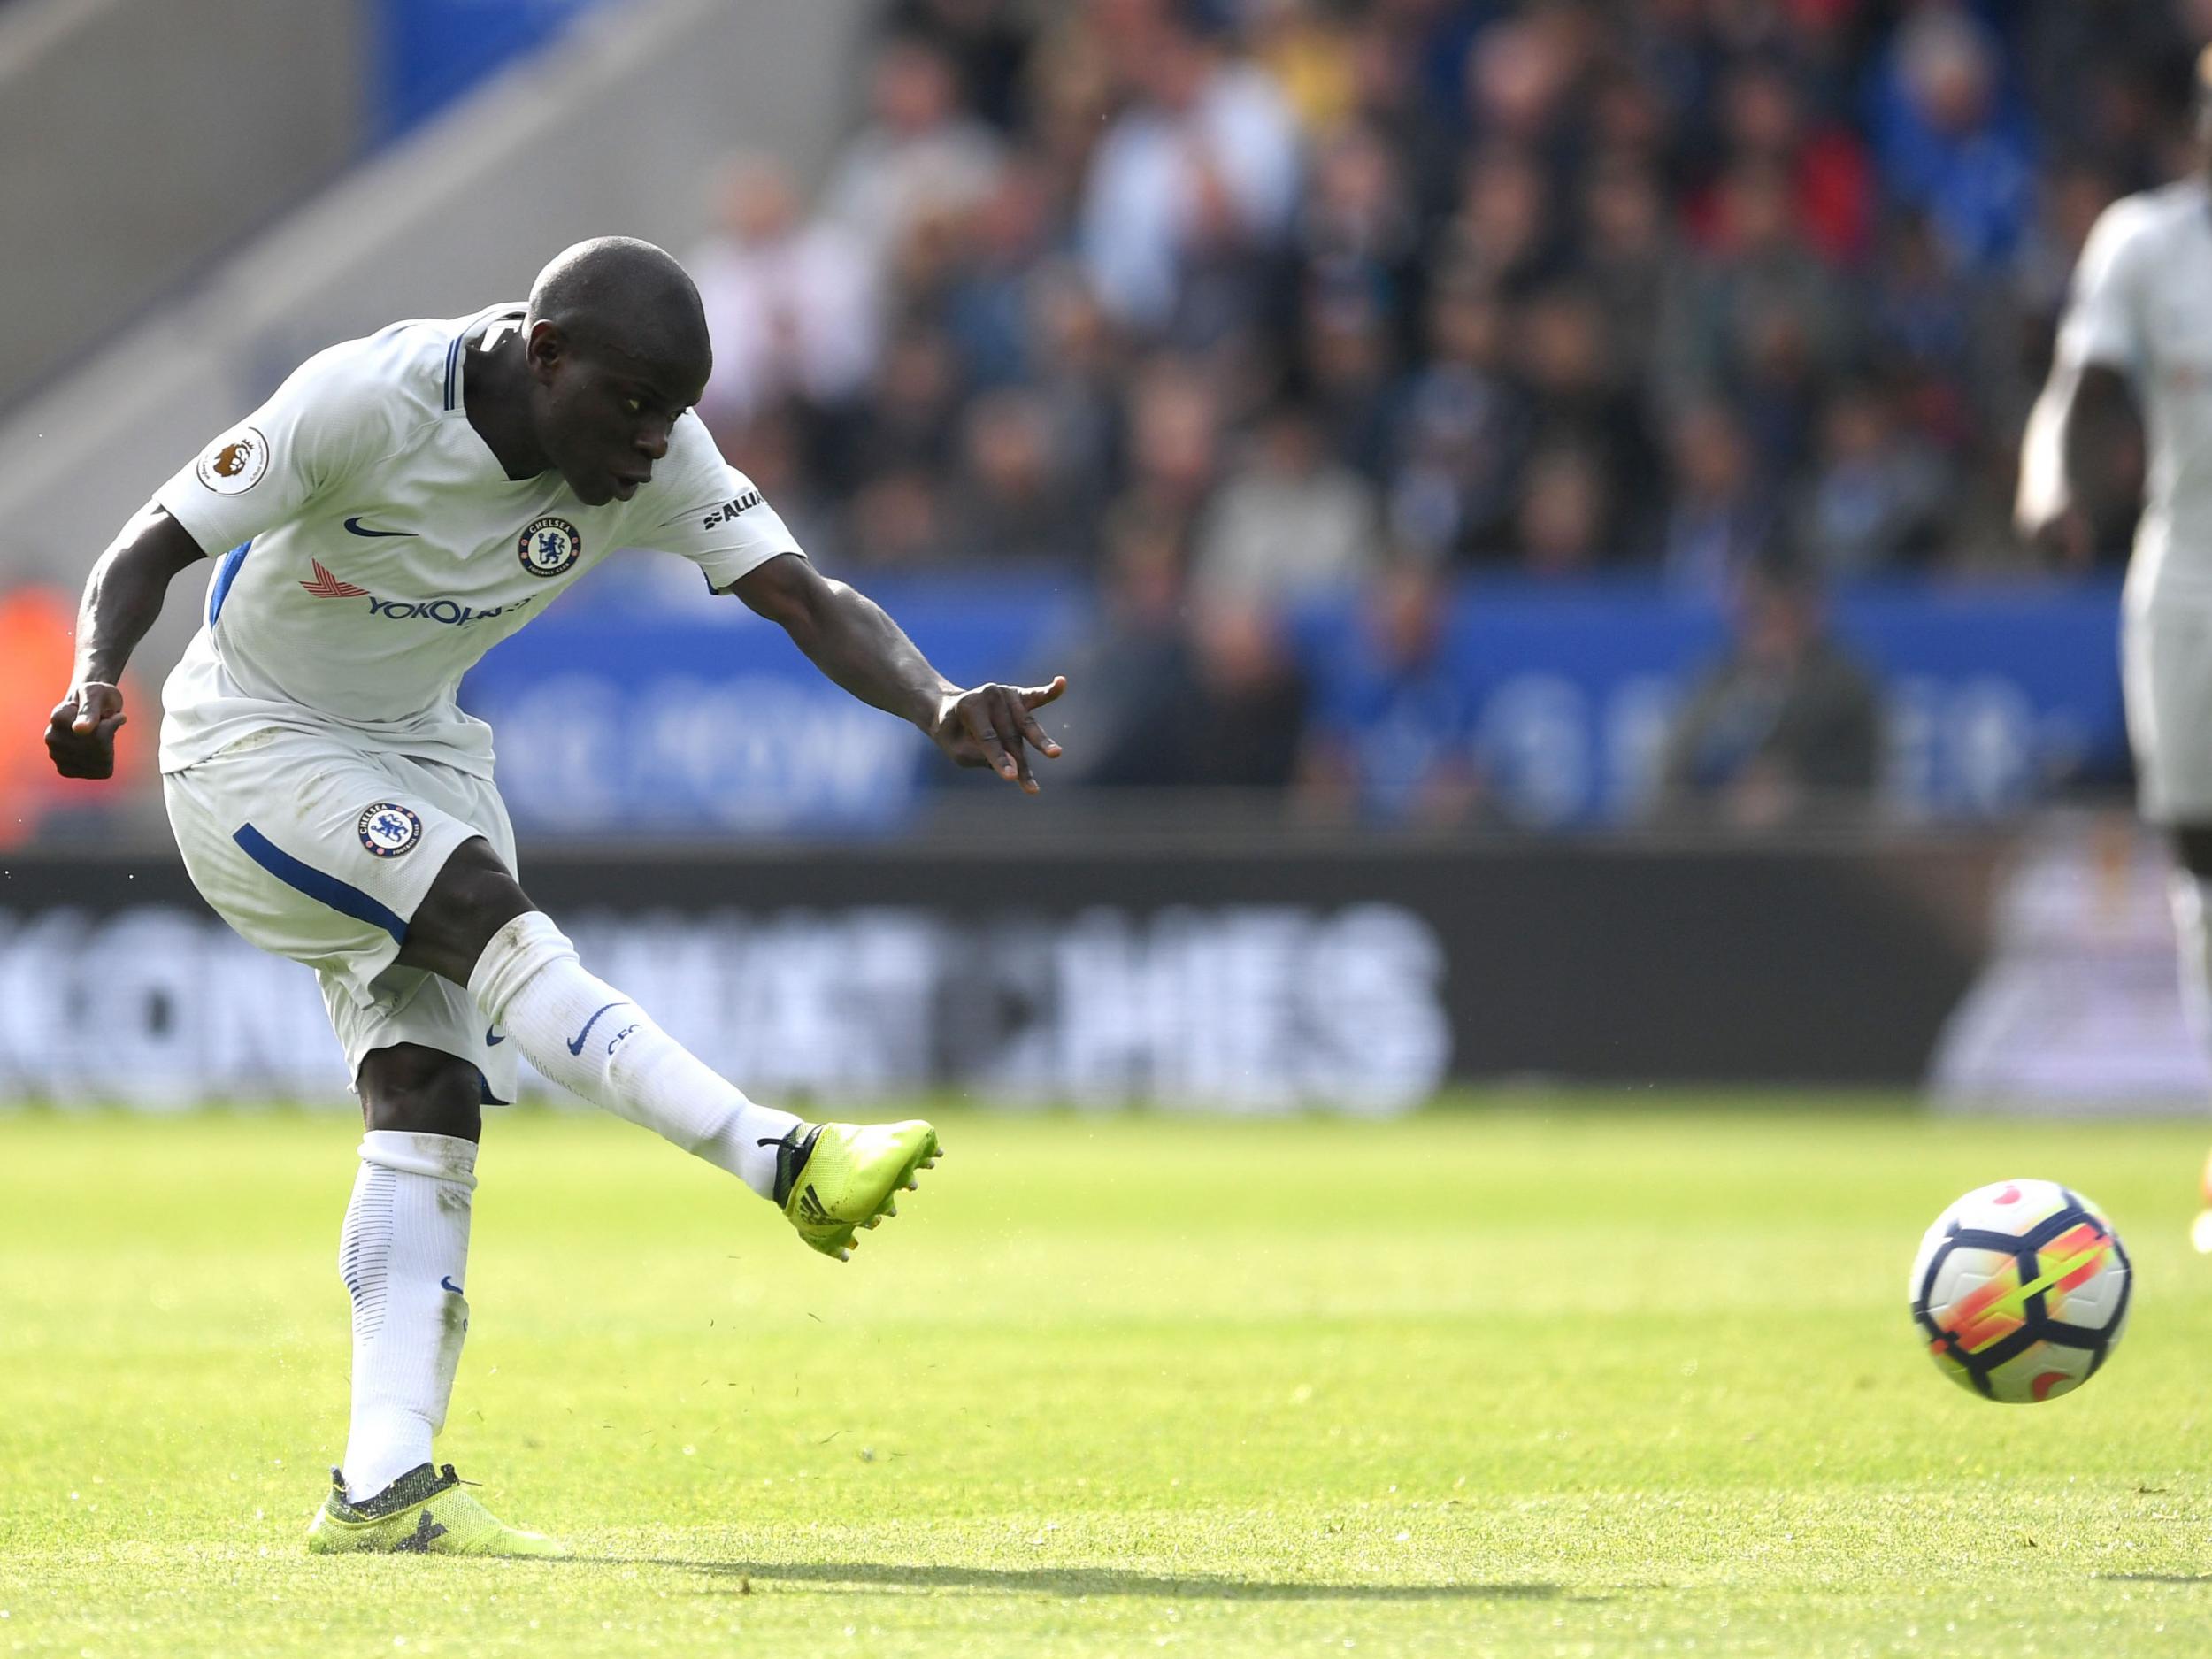 Kante said he doesn't feel like a player of the year